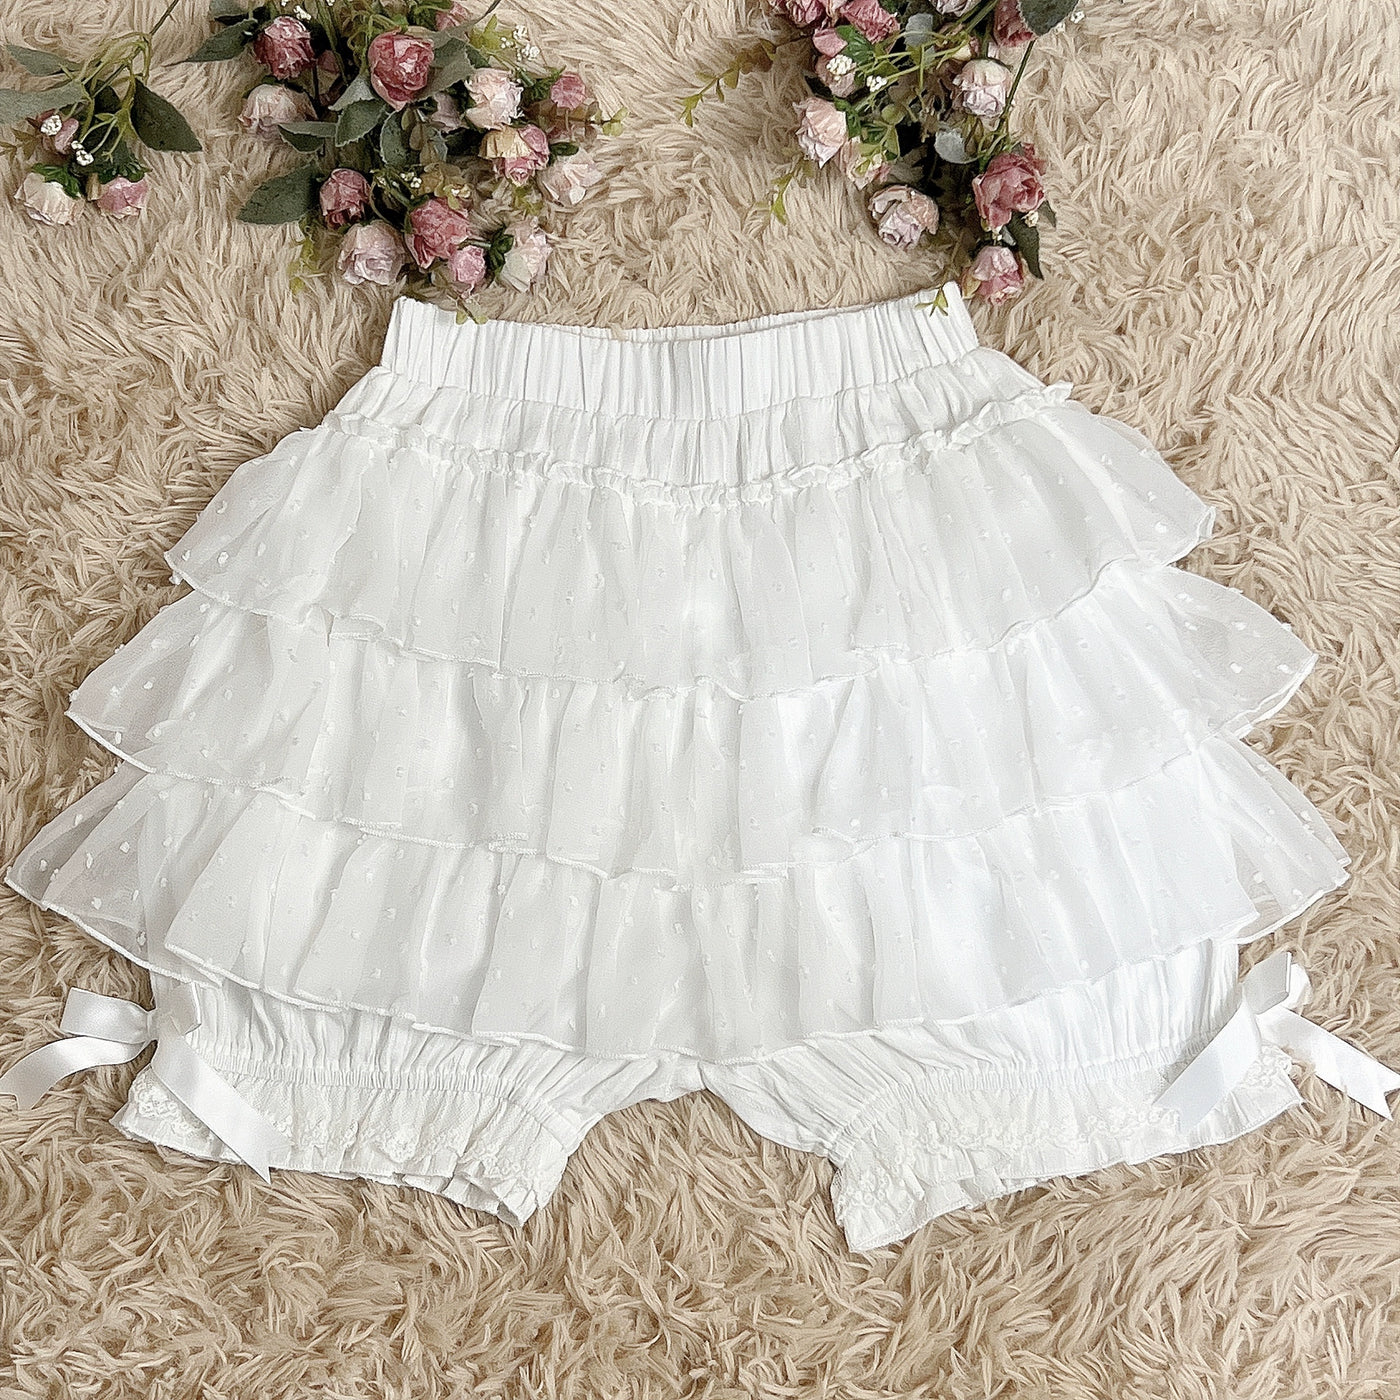 DMFS~Daily Lolita Bloomers Lace Cake Pants for Summer Wear Milk white Free size 